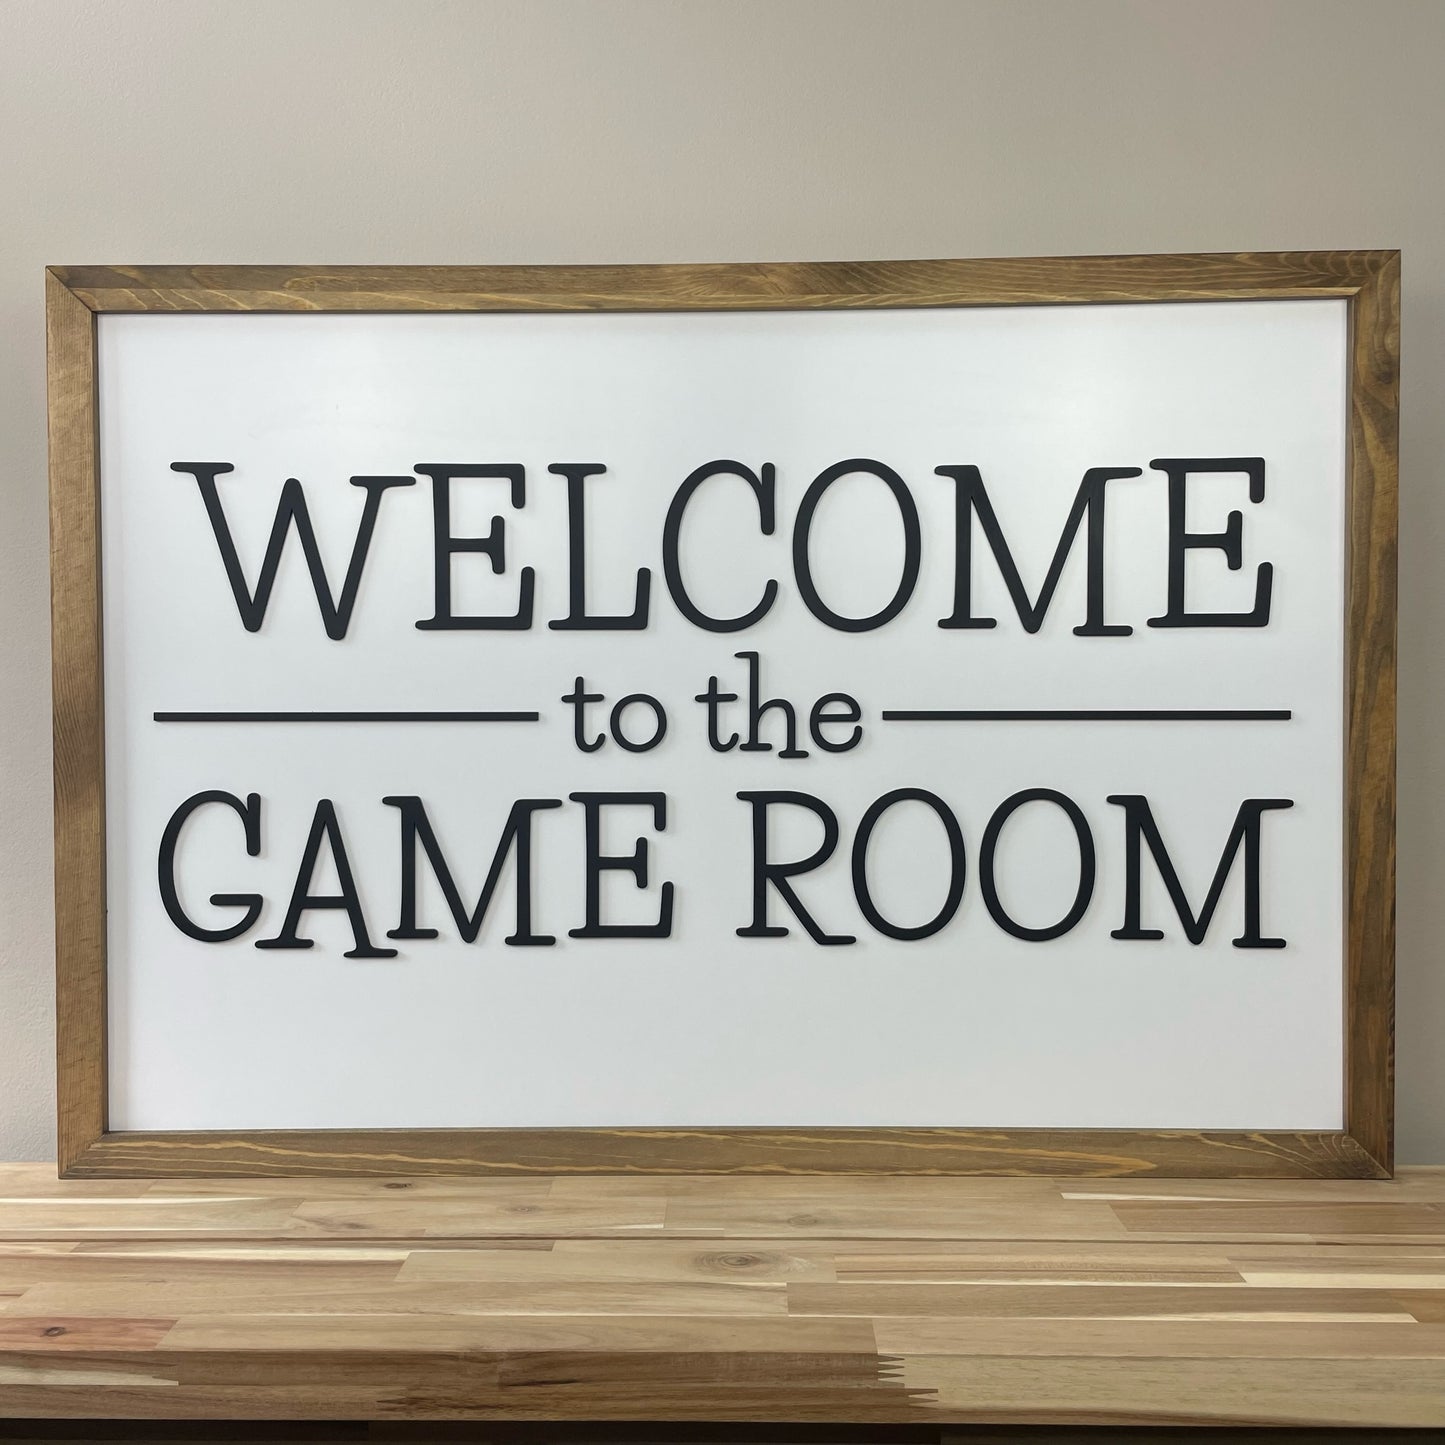 Welcome to the Game Room | 35x24 inch Wood Sign